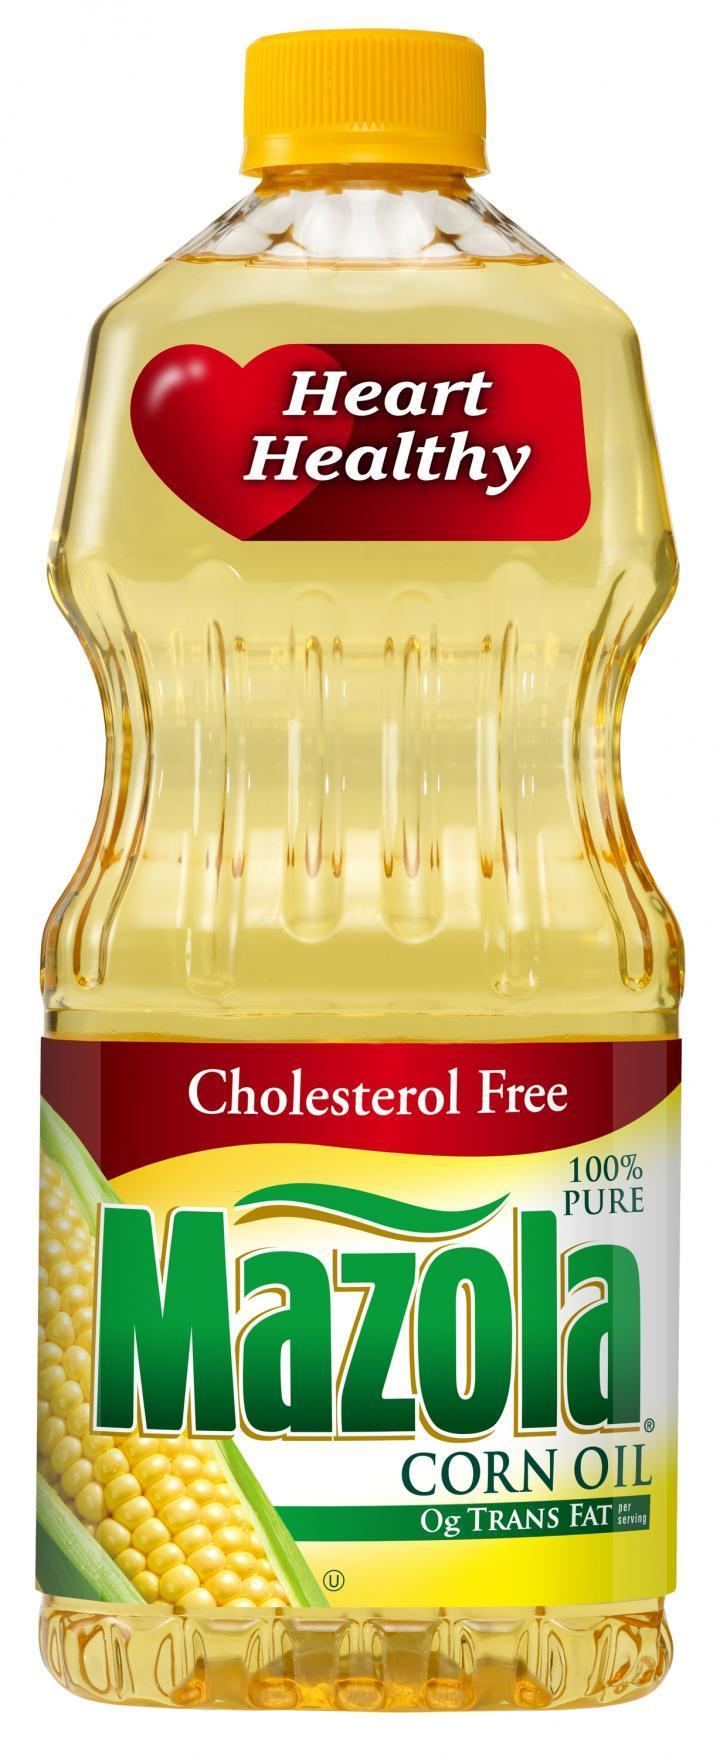 Corn oil Research study published Corn oil helps lower cholesterol more